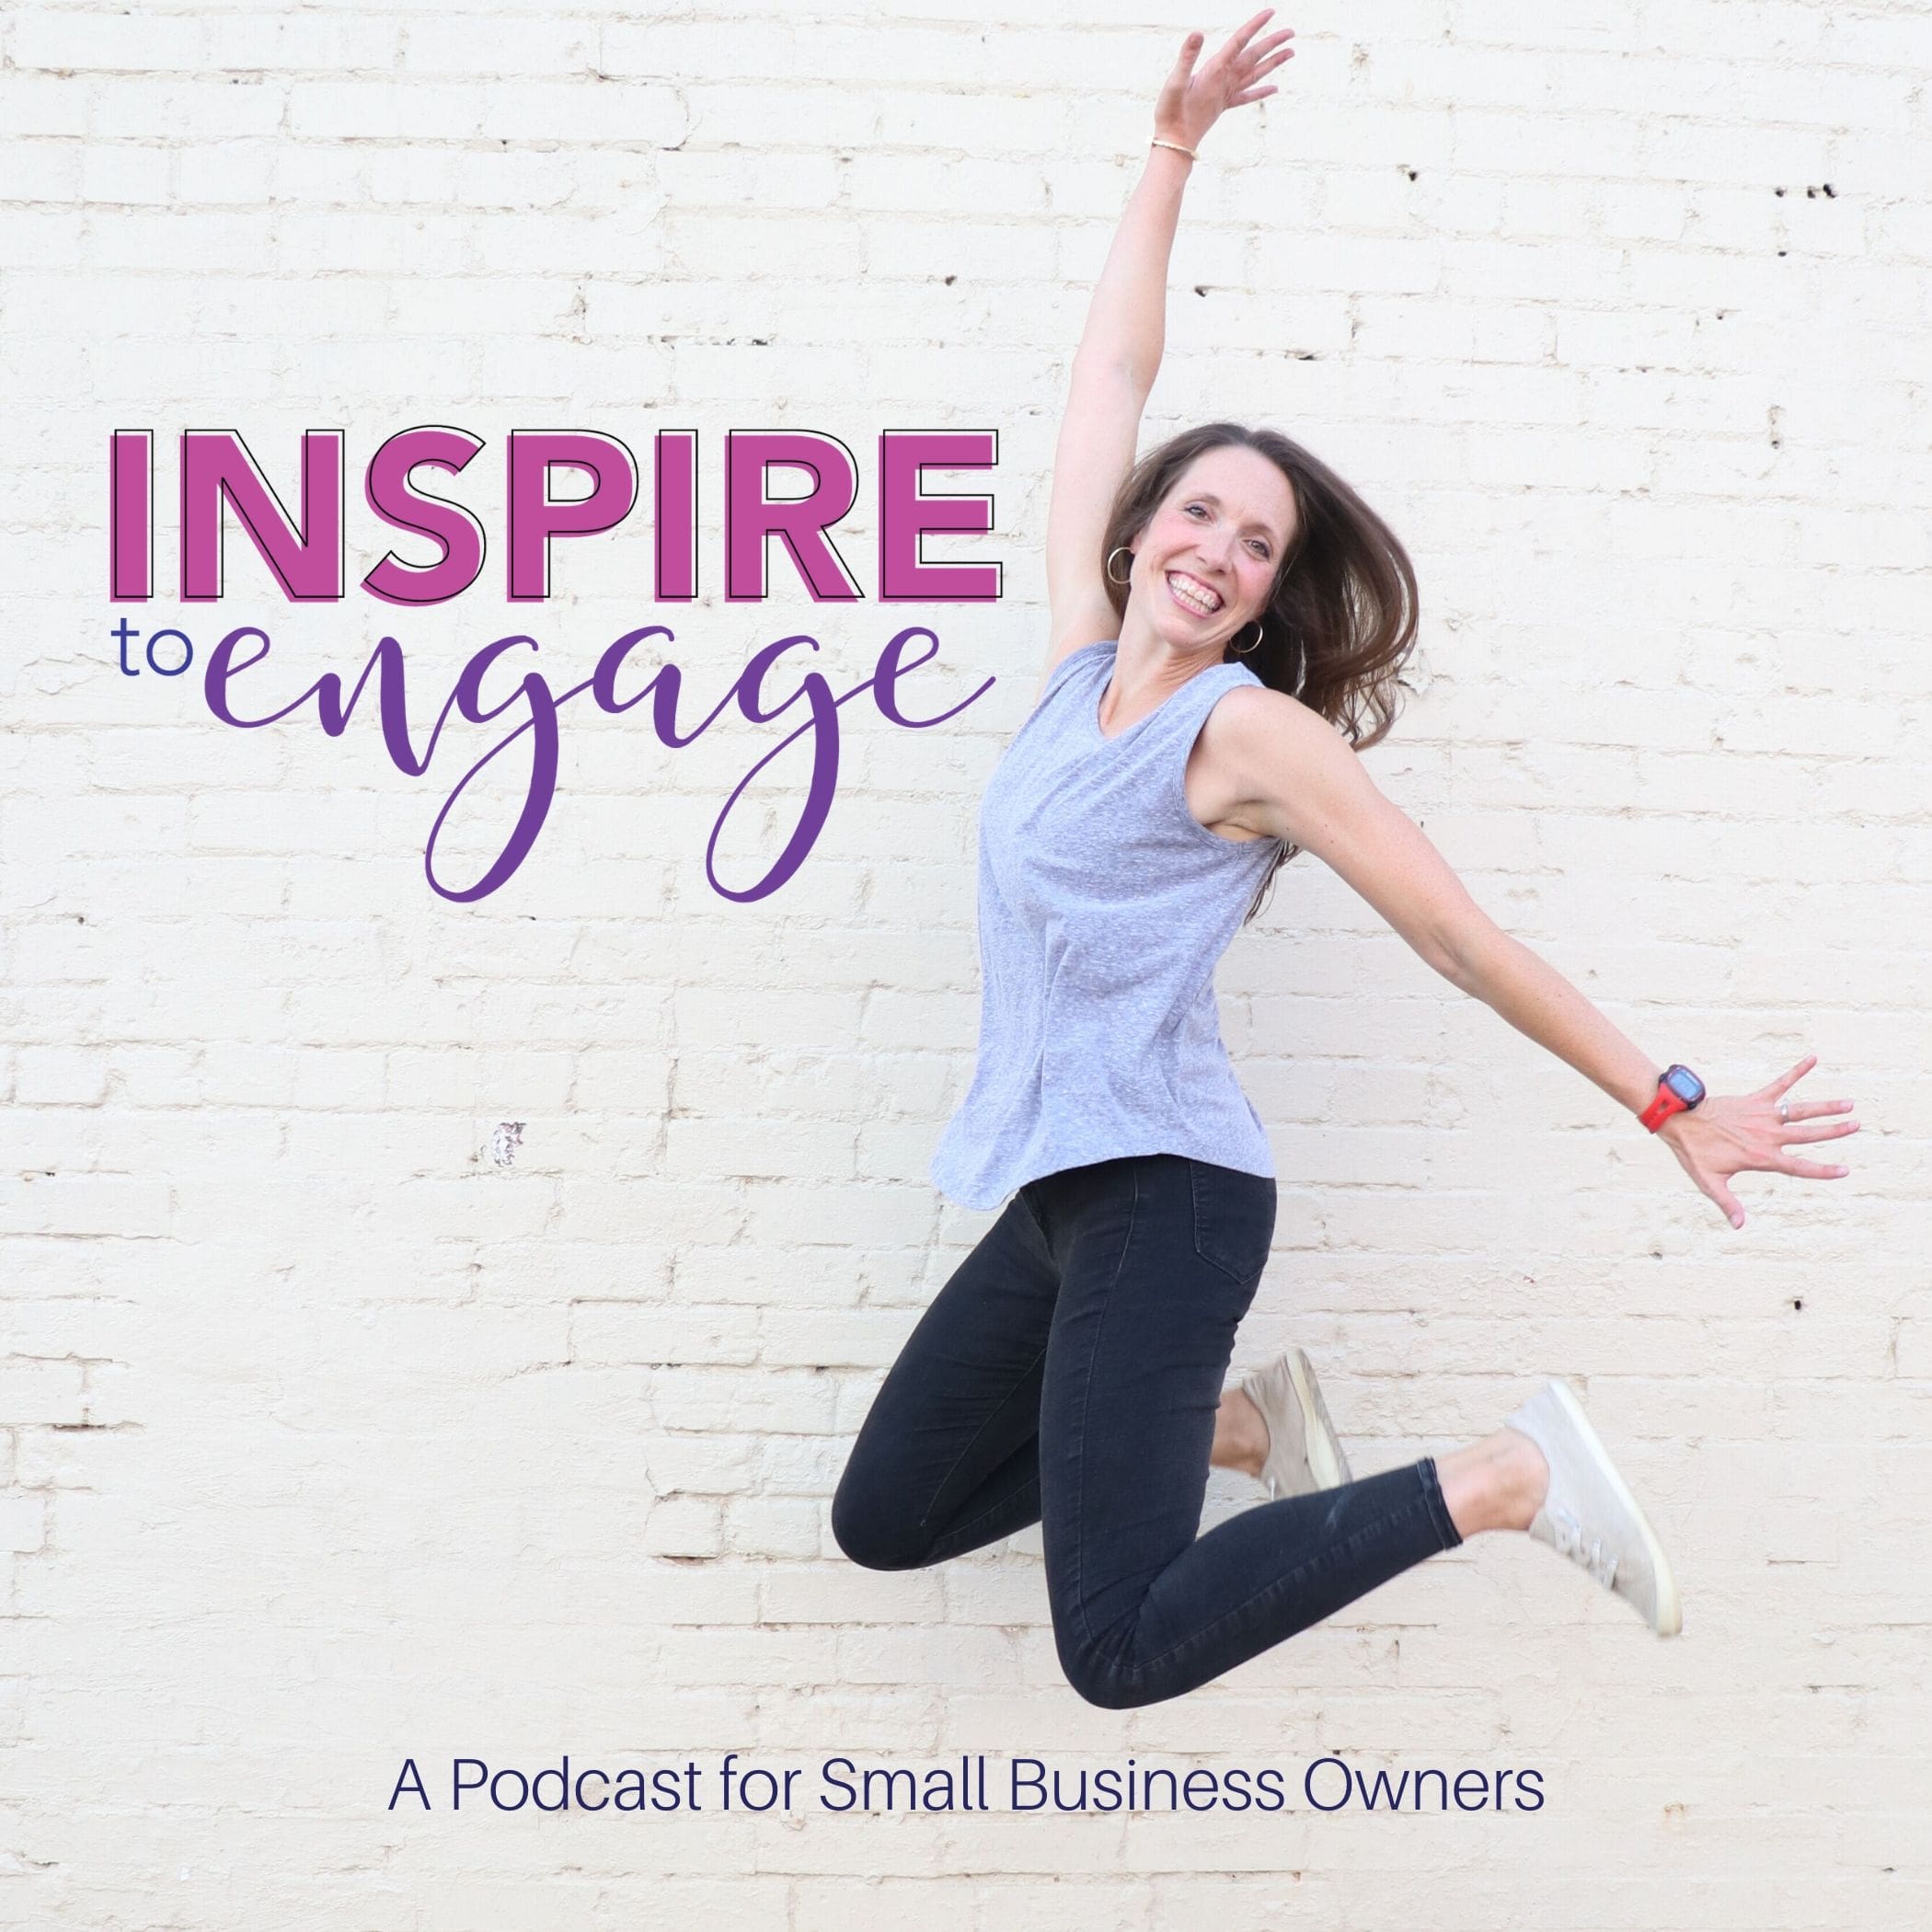 Inspire to engage podcast with Rachel Eubanks